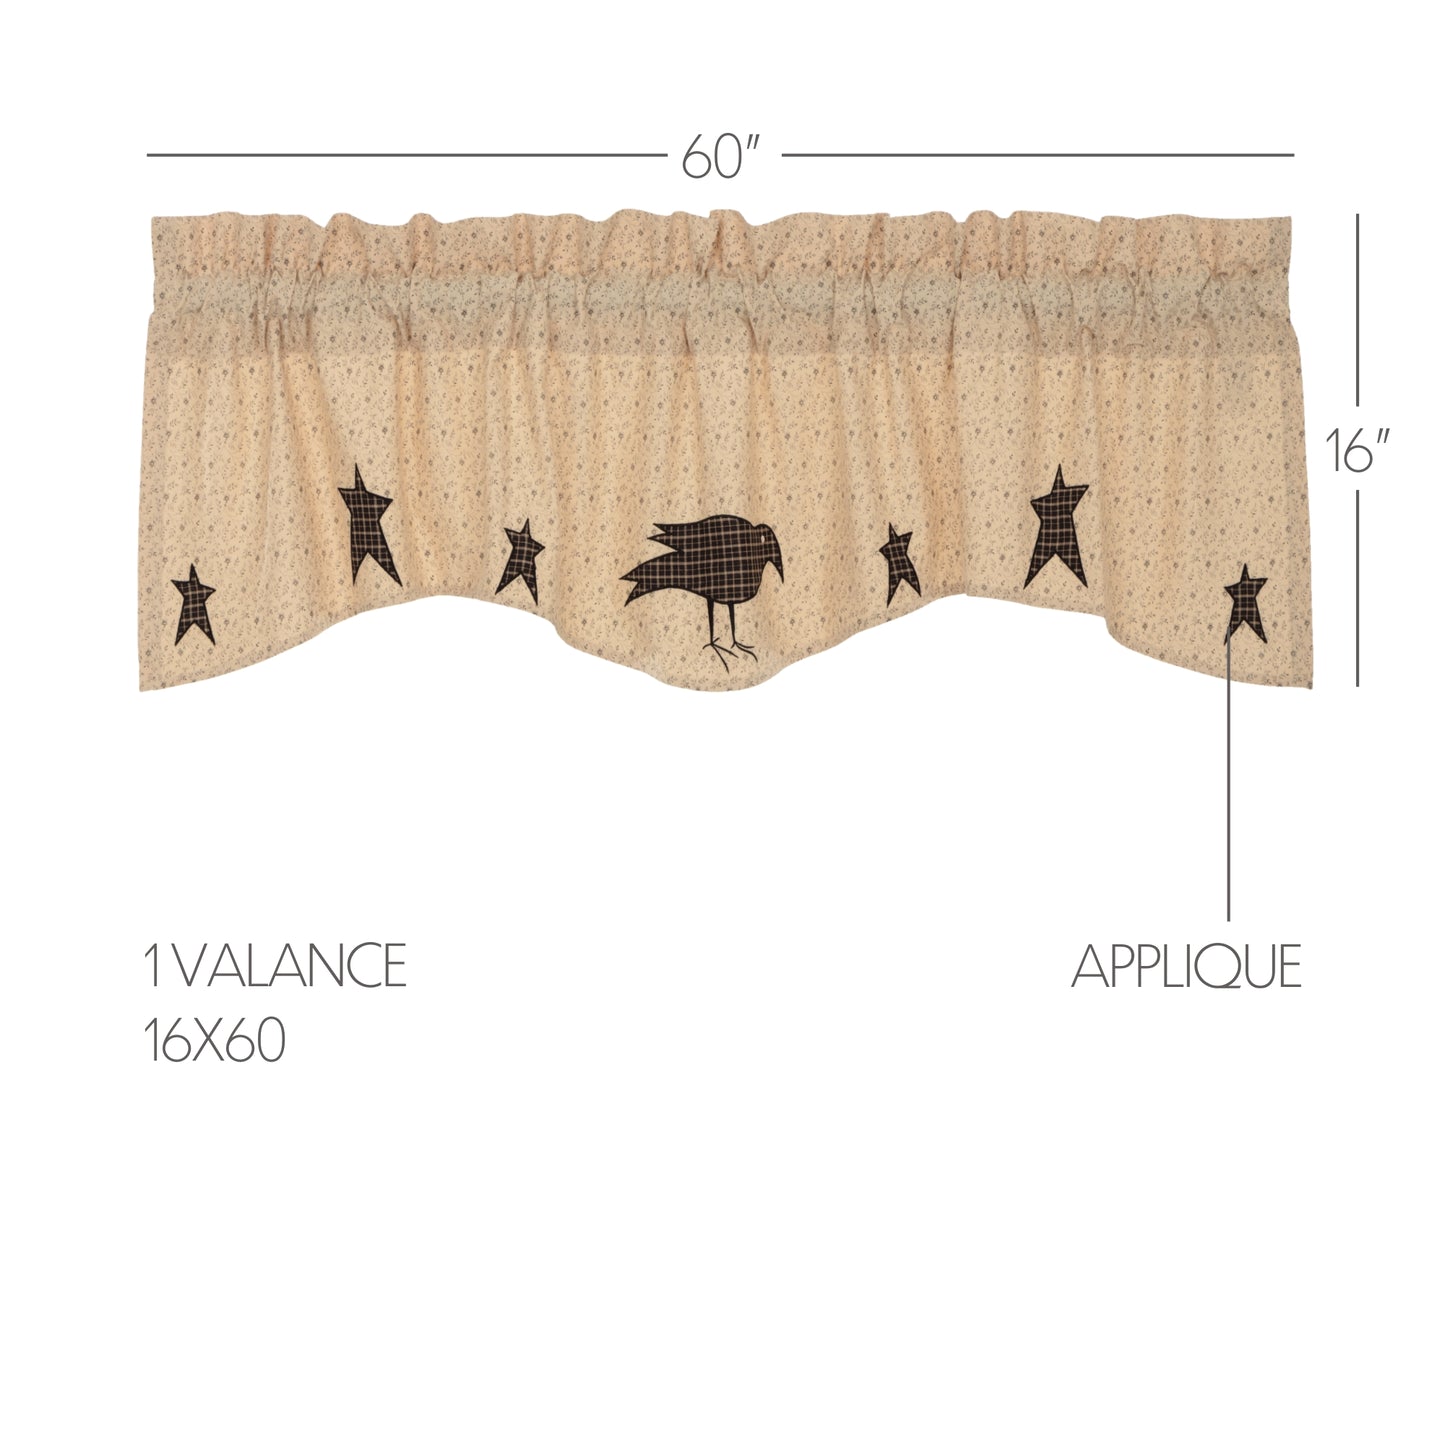 45793-Kettle-Grove-Applique-Crow-and-Star-Valance-16x60-image-1